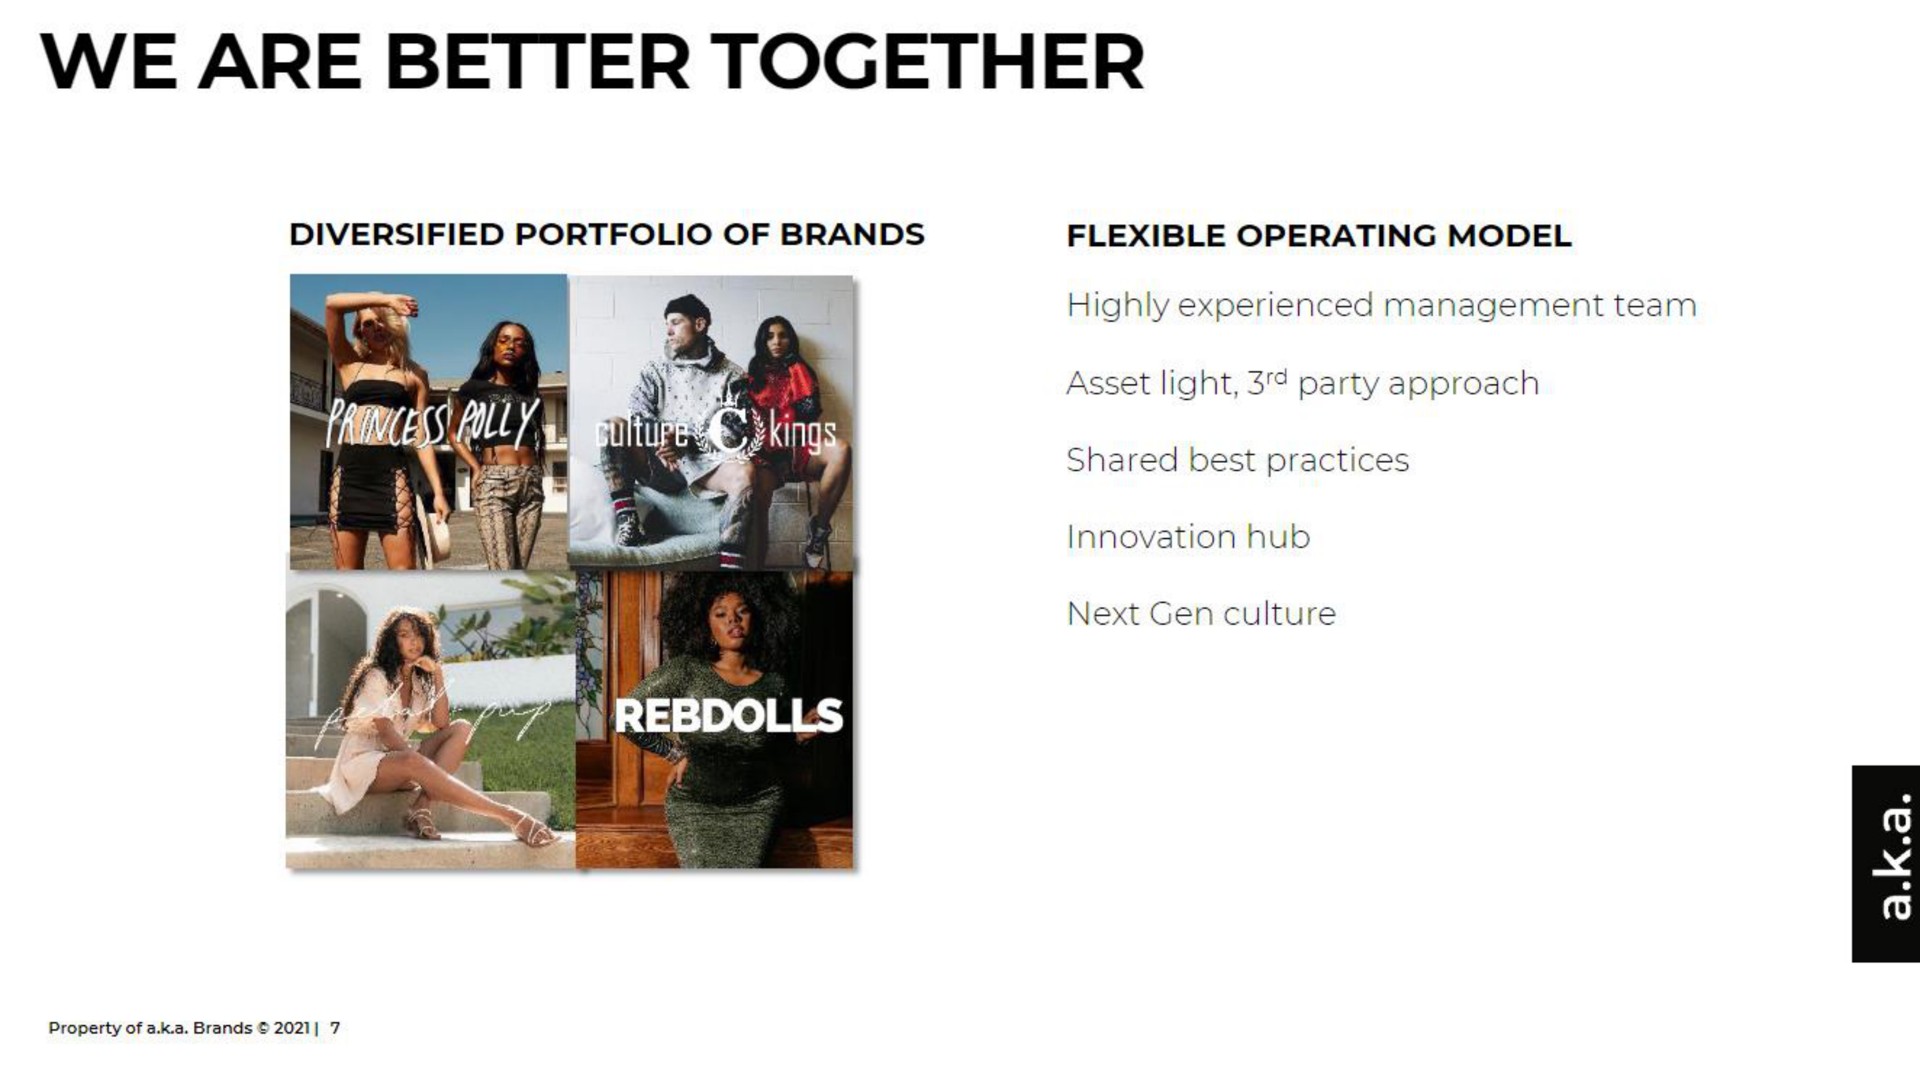 we are better together we | a.k.a. Brands